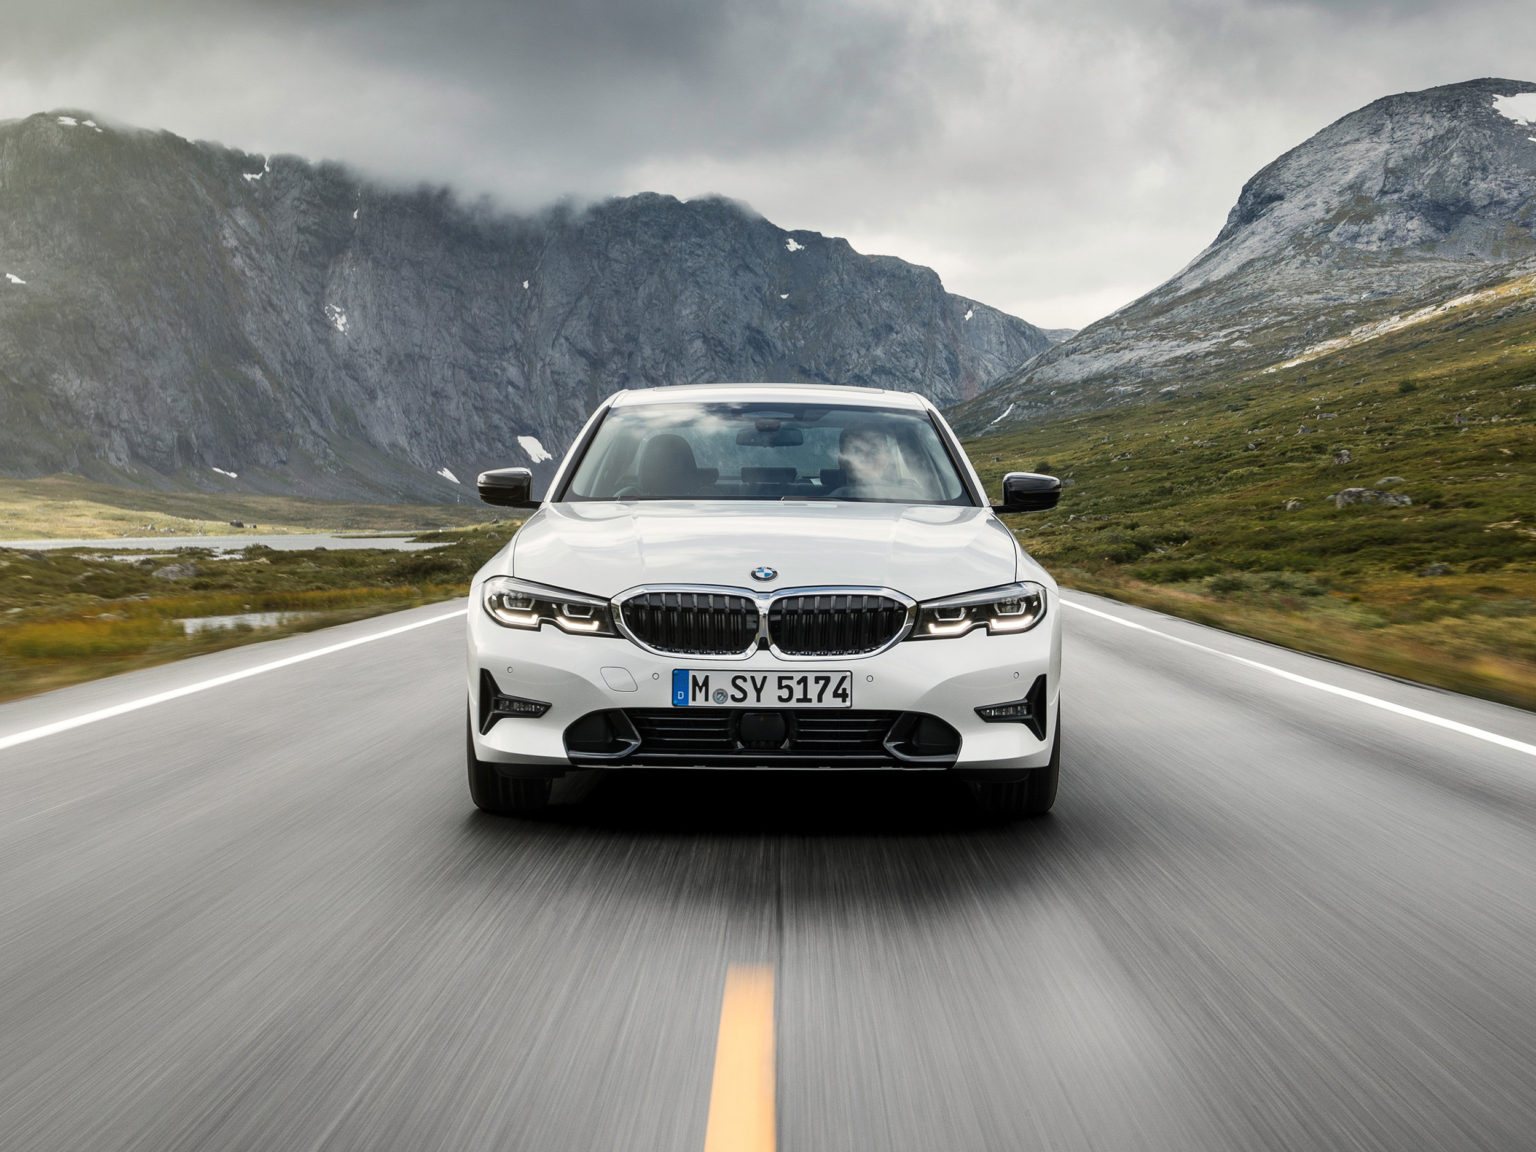 BMW recently redesigned its 3 Series. The 2021 BMW 330e is the latest model to be added to the 3 Series lineup.